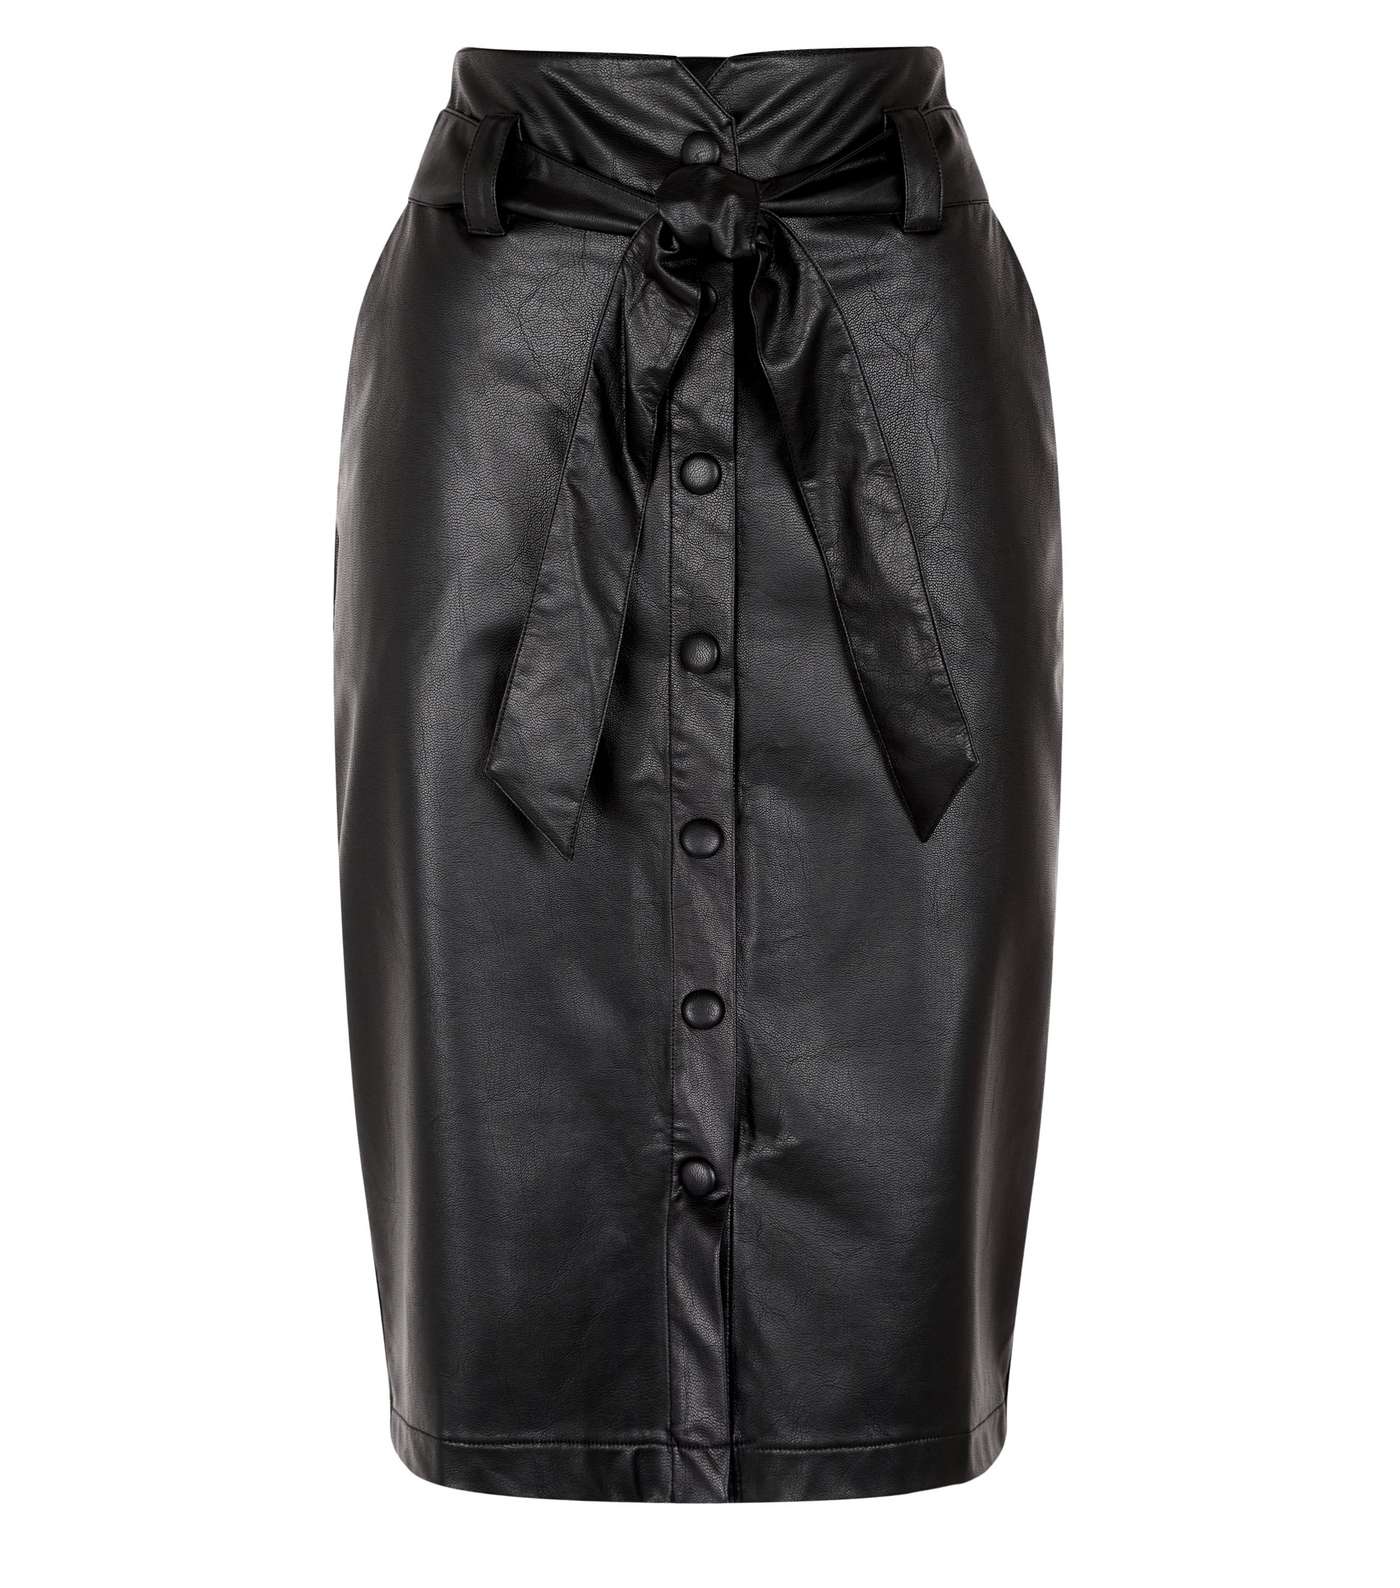 Petite Black Leather-Look Belted Pencil Skirt Image 4